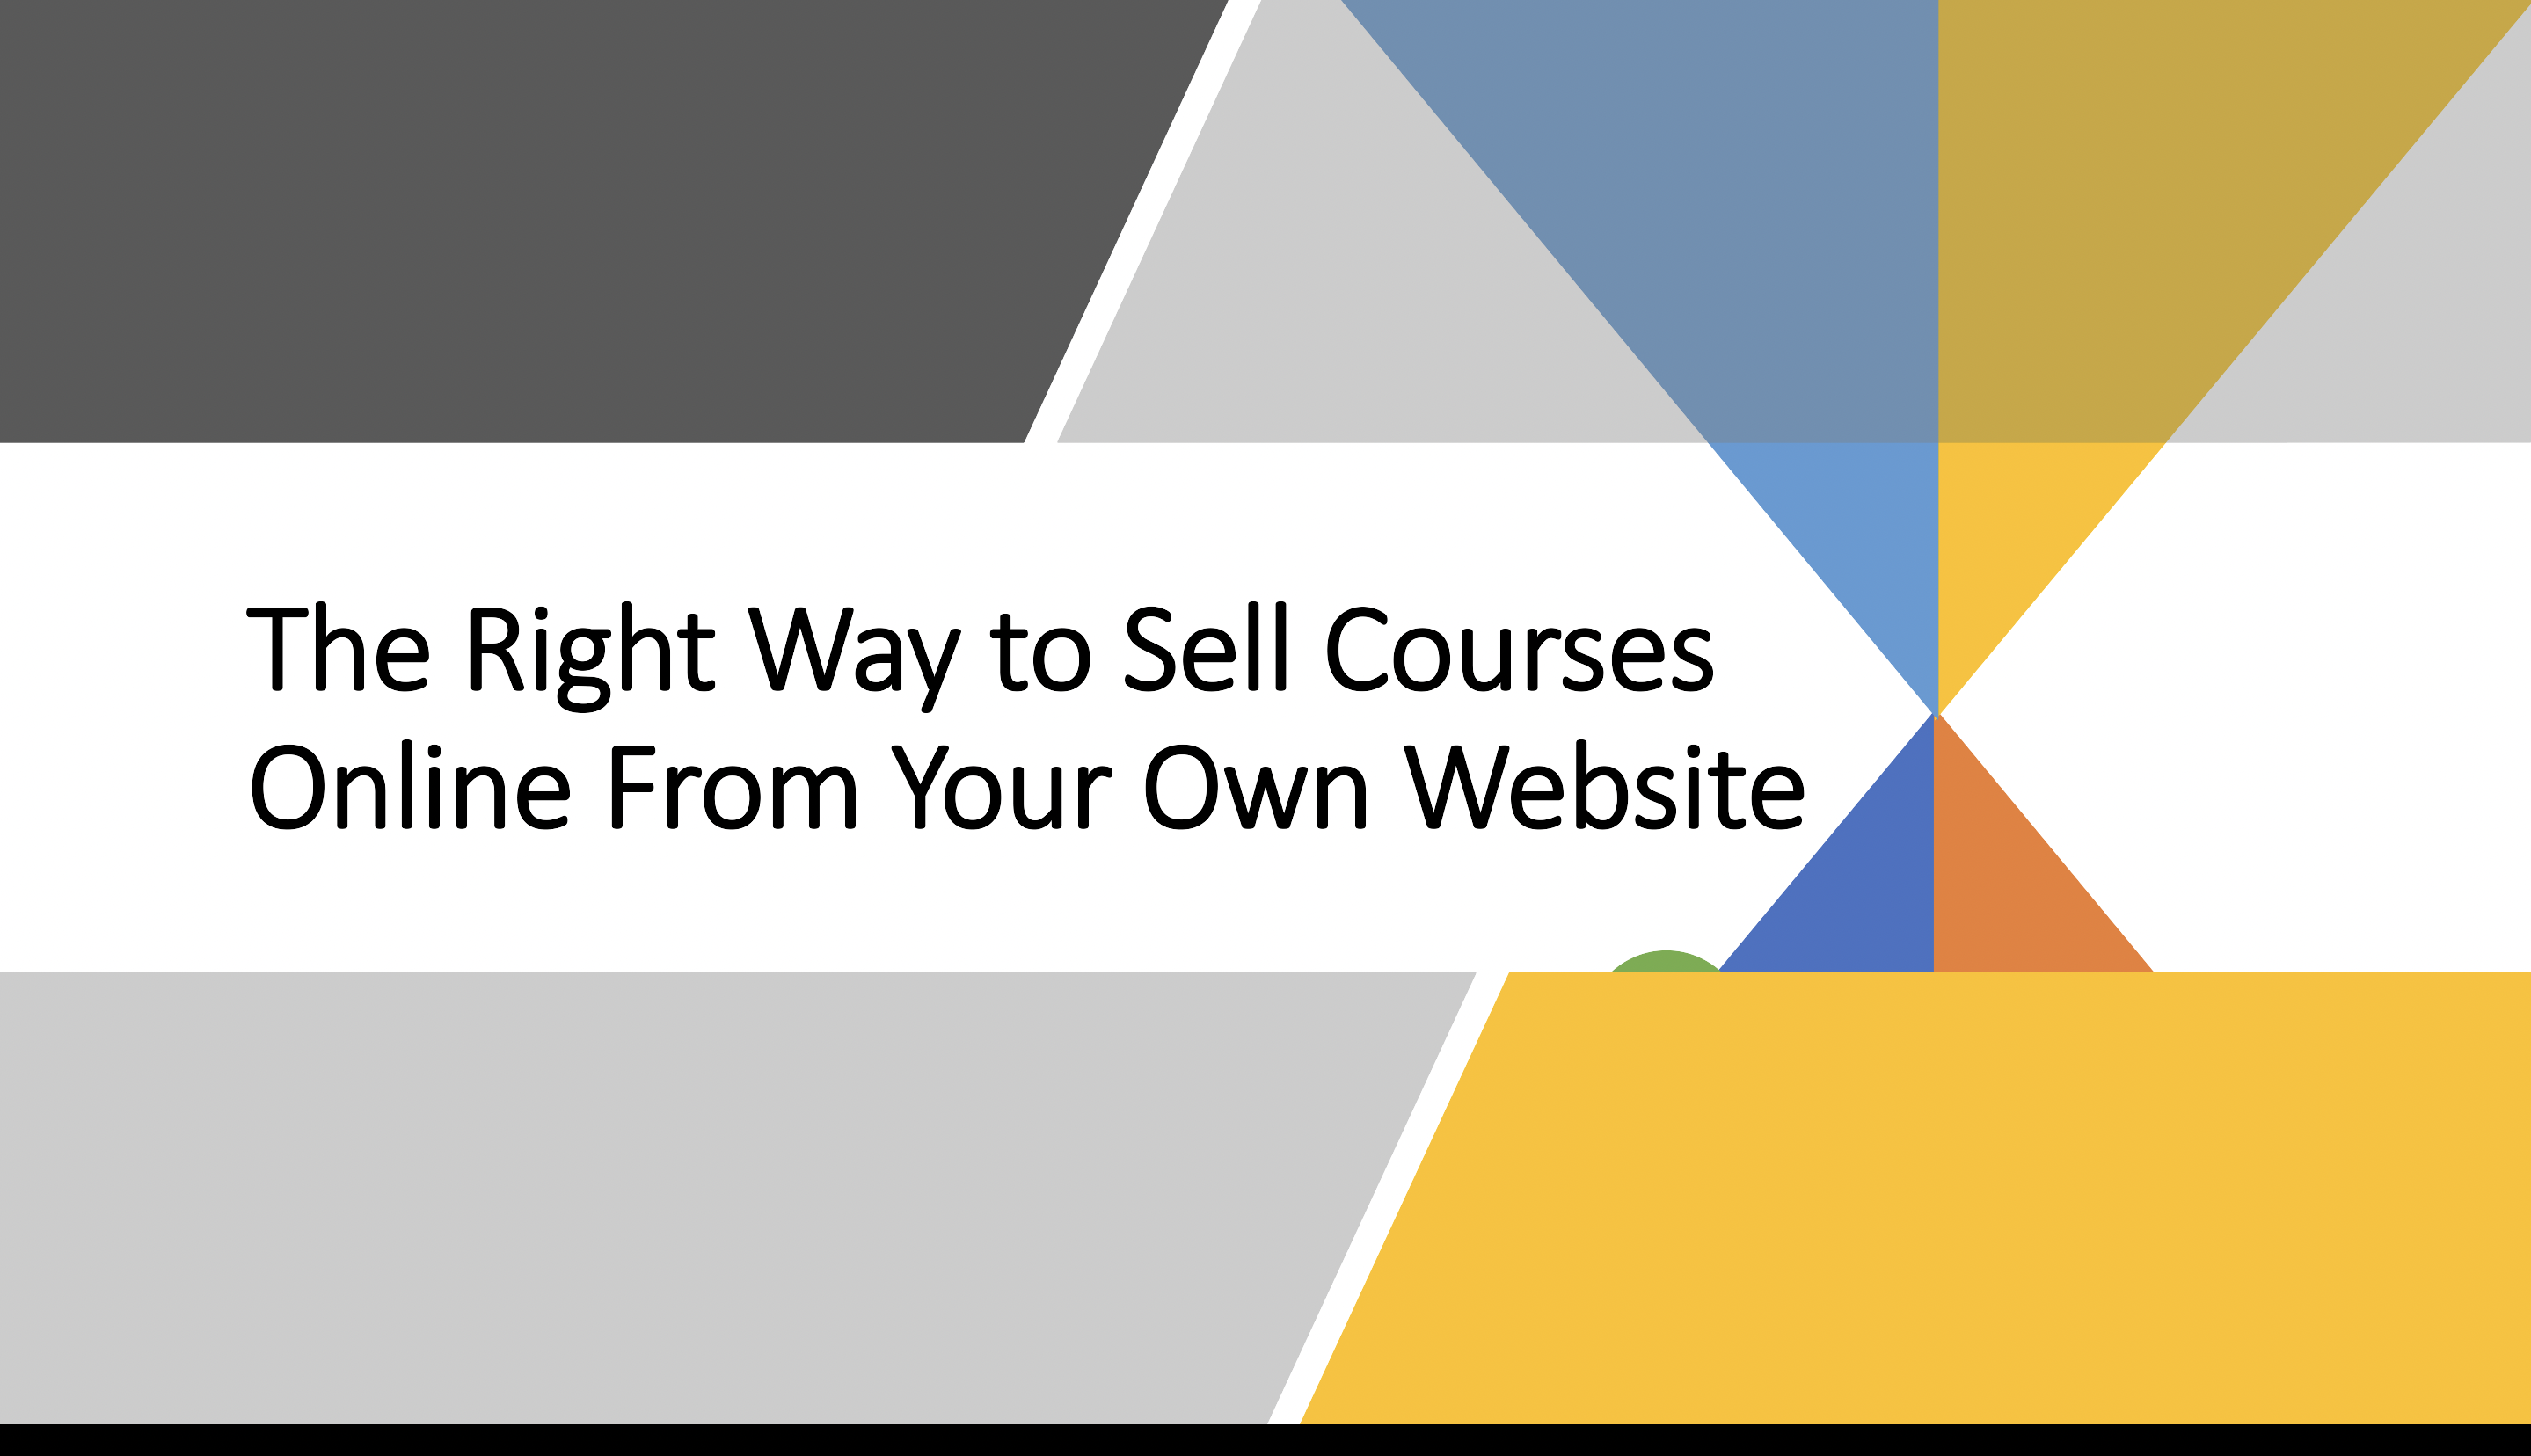 The Right Way to Sell Online Courses From Your Own Website